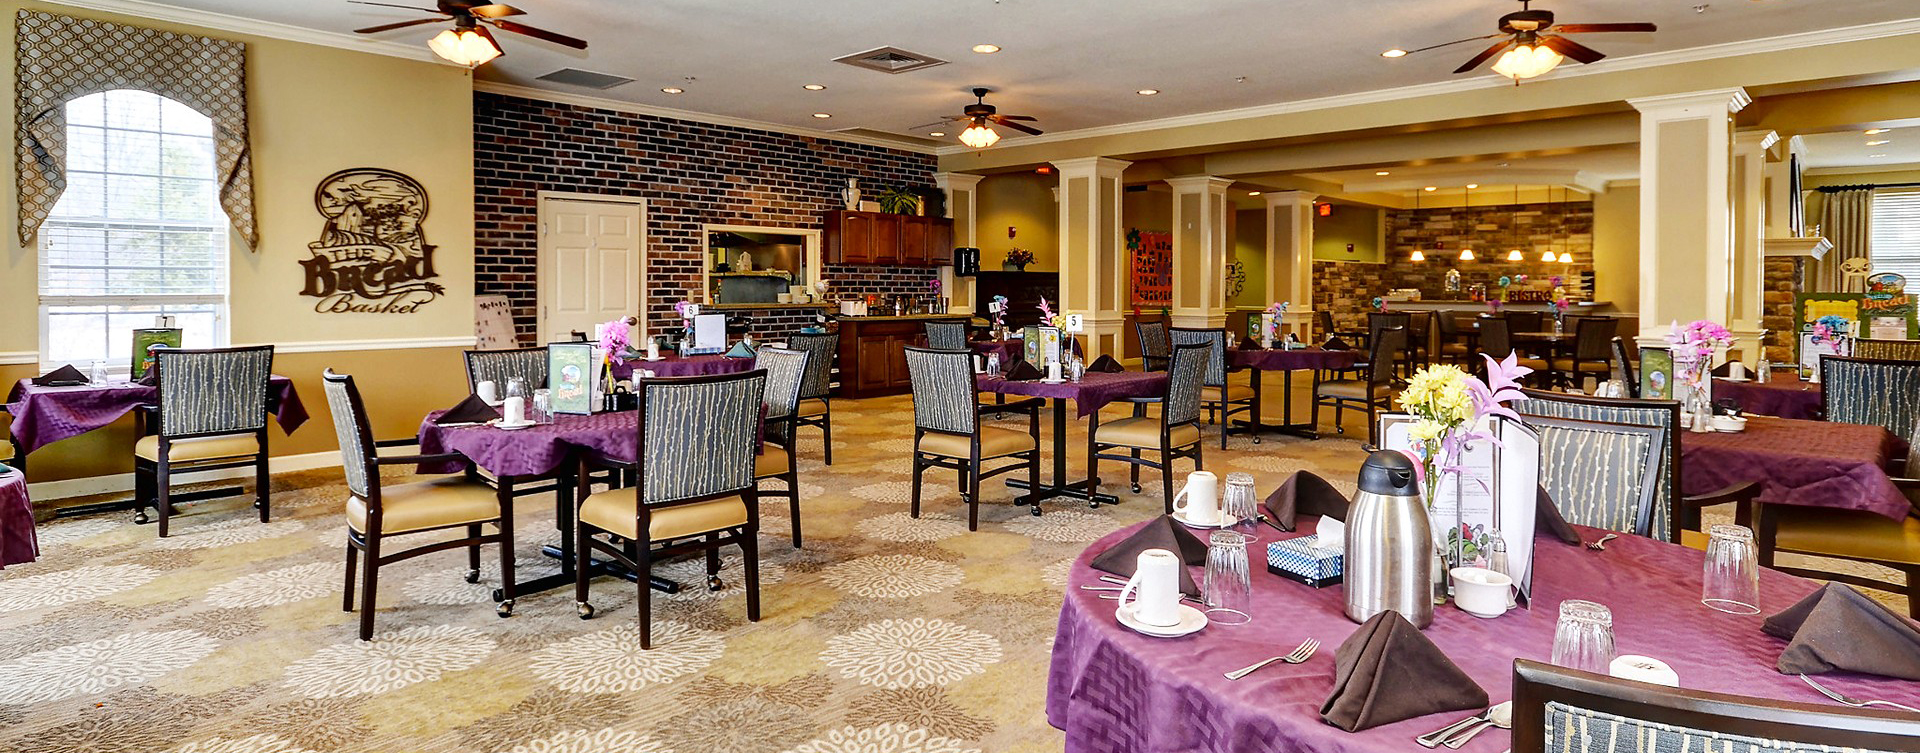 Enjoy restaurant -style meals served three times a day in our dining room at Bickford of Crystal Lake